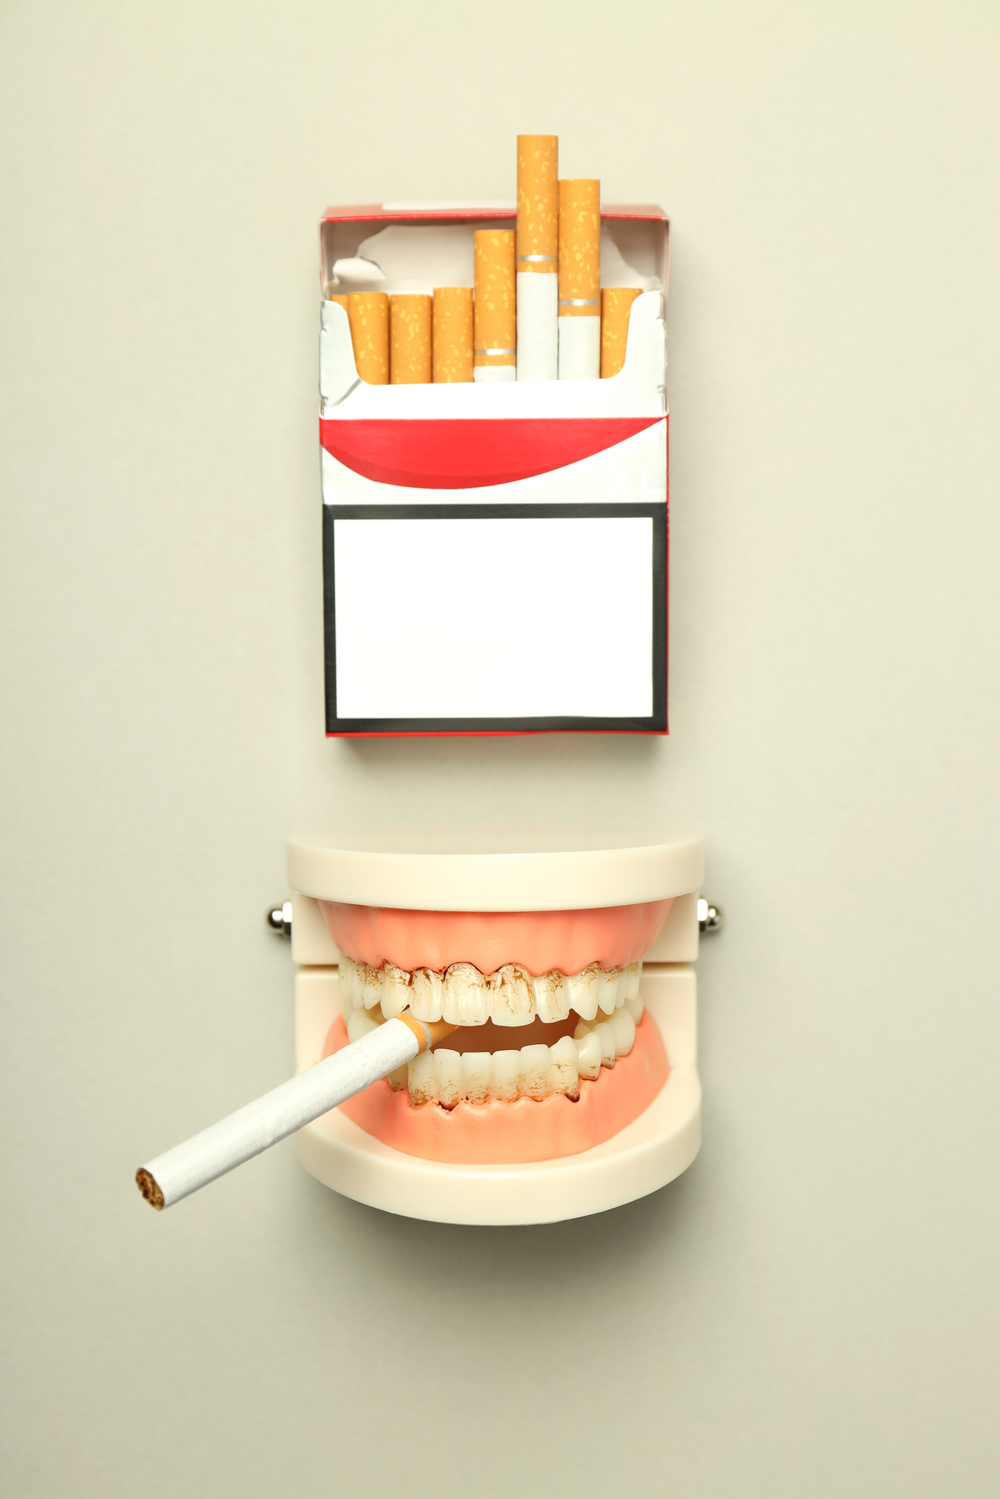 Concept of harm of smoking for teeth